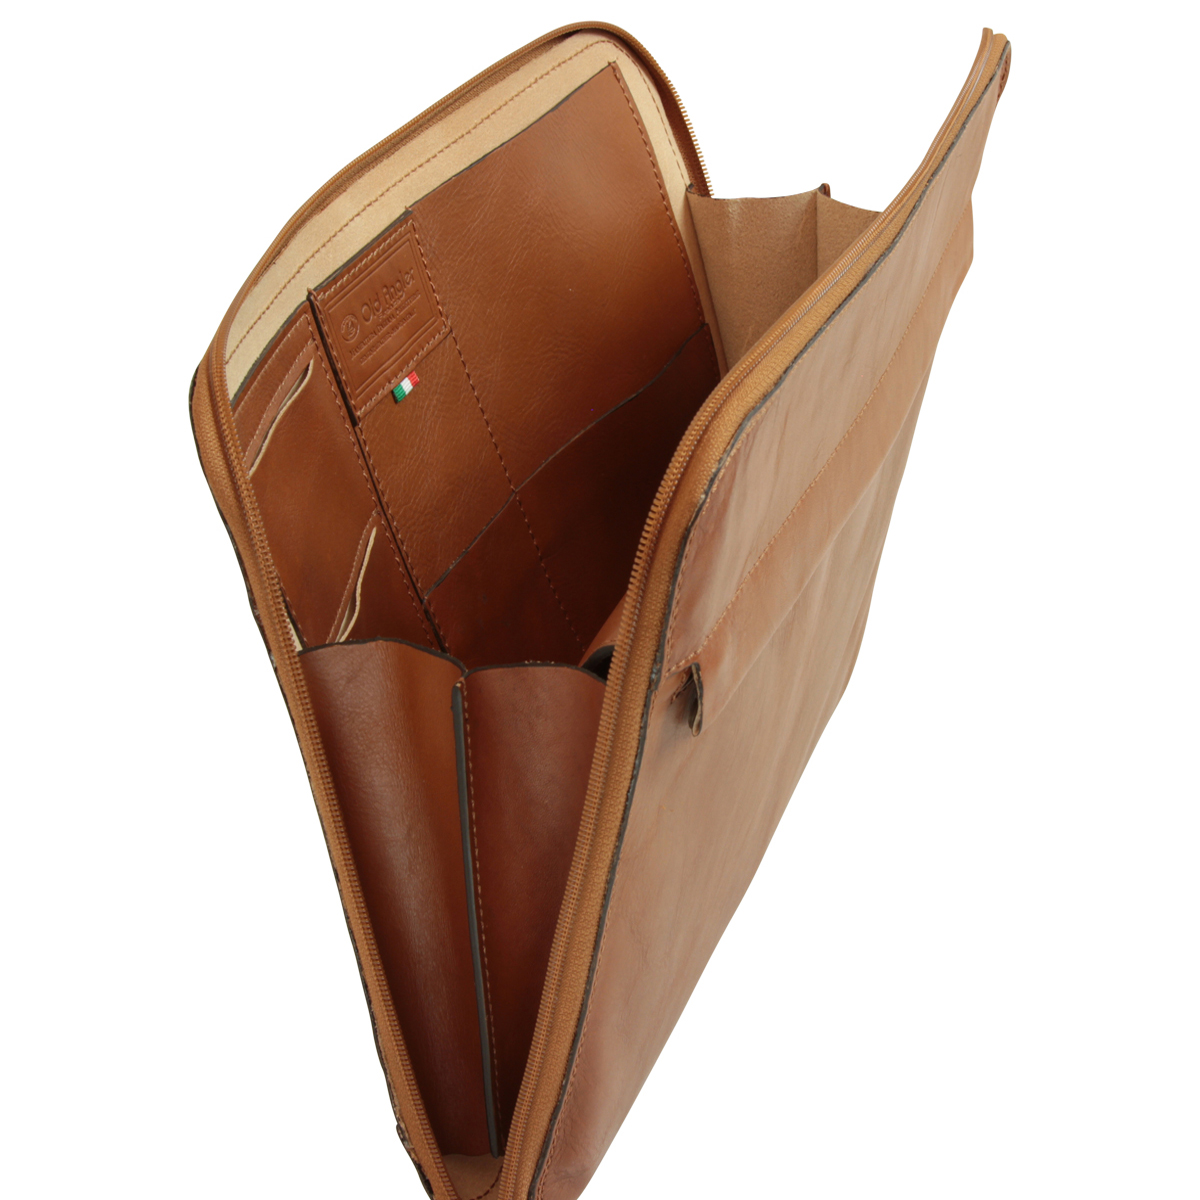 Leather Folder - Brown Colonial | 056889CO US | Old Angler Firenze